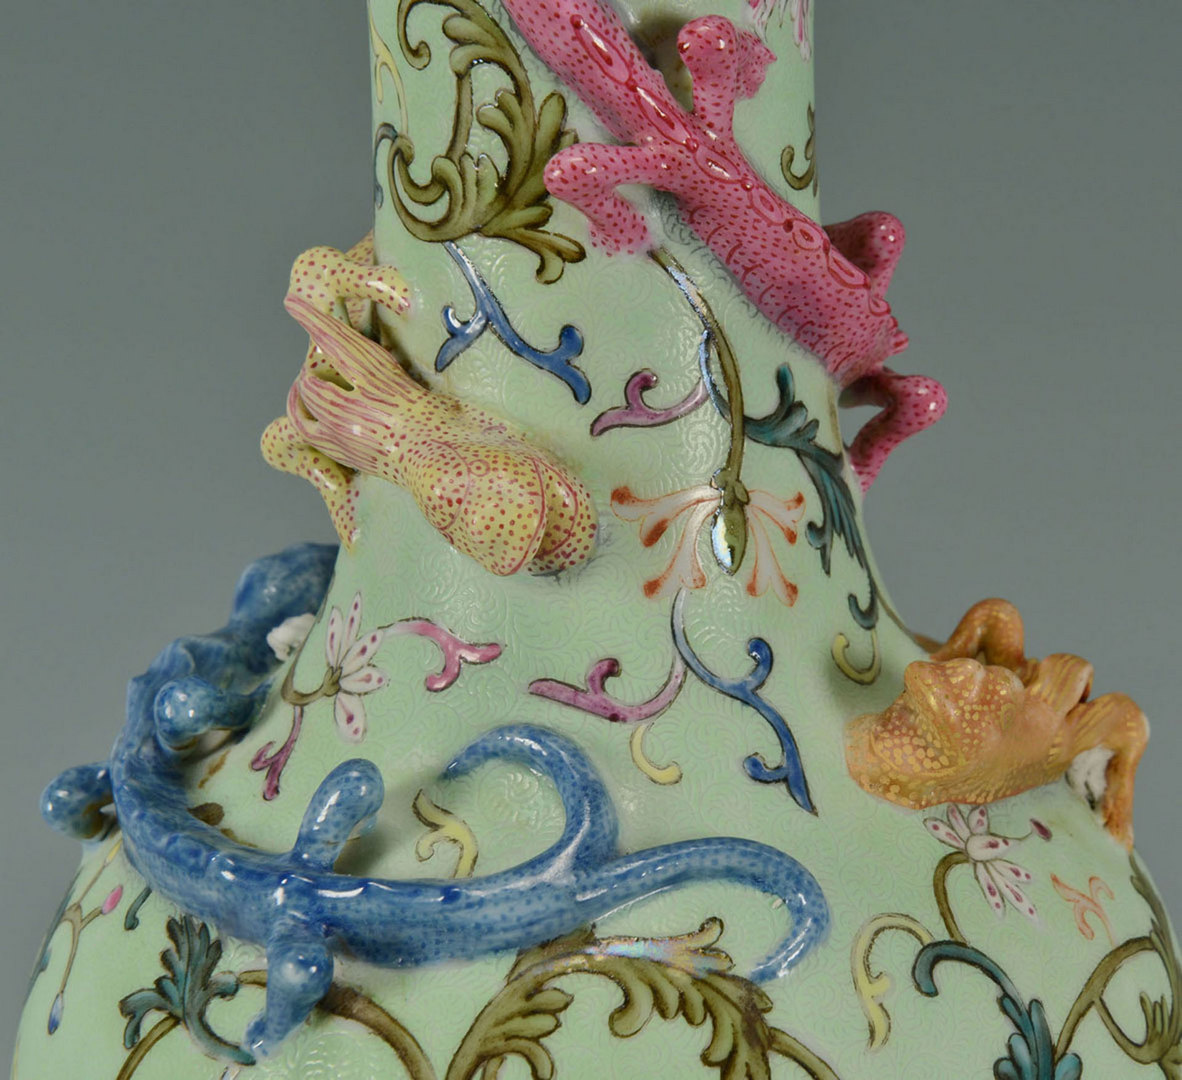 Lot 225: Chinese Famille Rose Vase w/ applied Lizards